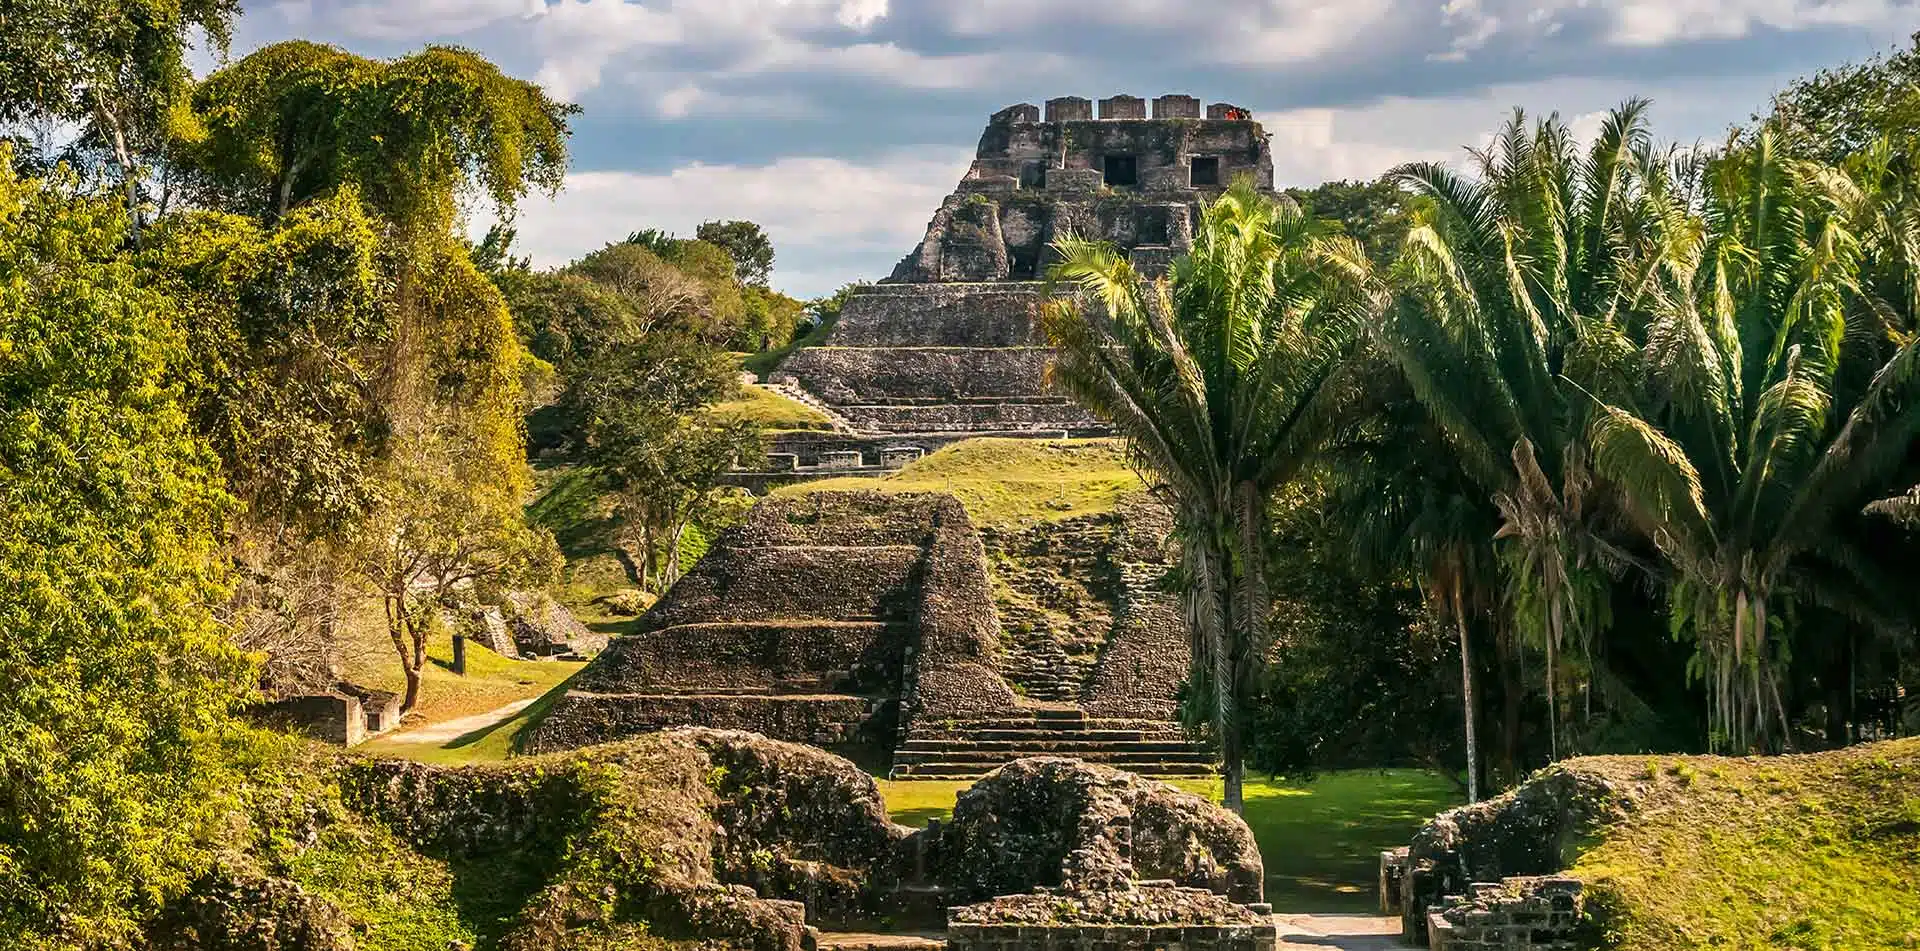 Central America Belize historical Xunantunich ruins ancient Mayan architecture - luxury vacation destinations